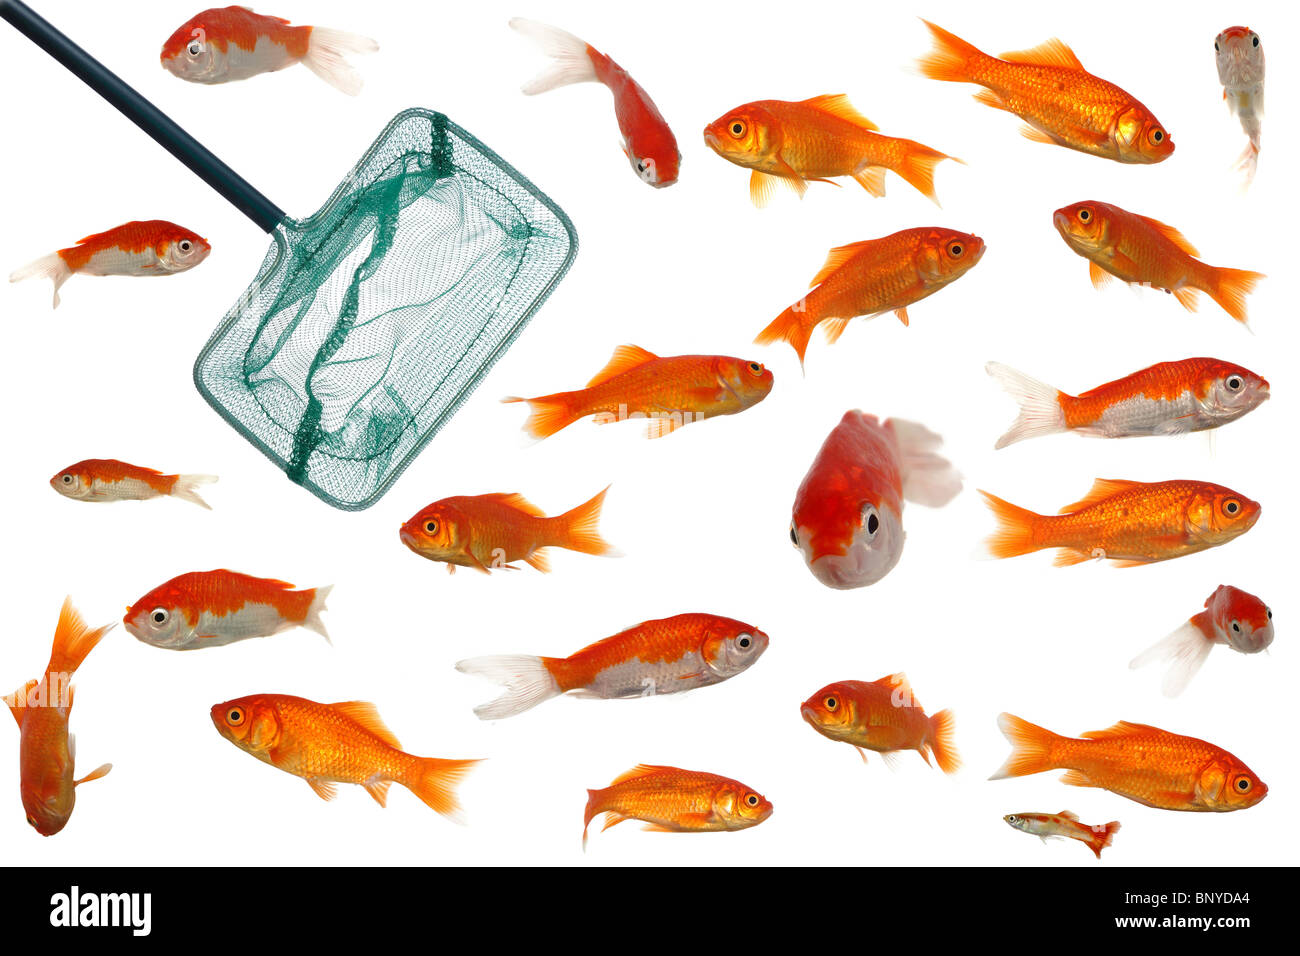 Fishing net is in an aquarium full of goldfish. Isolated on a clean white background. Stock Photo